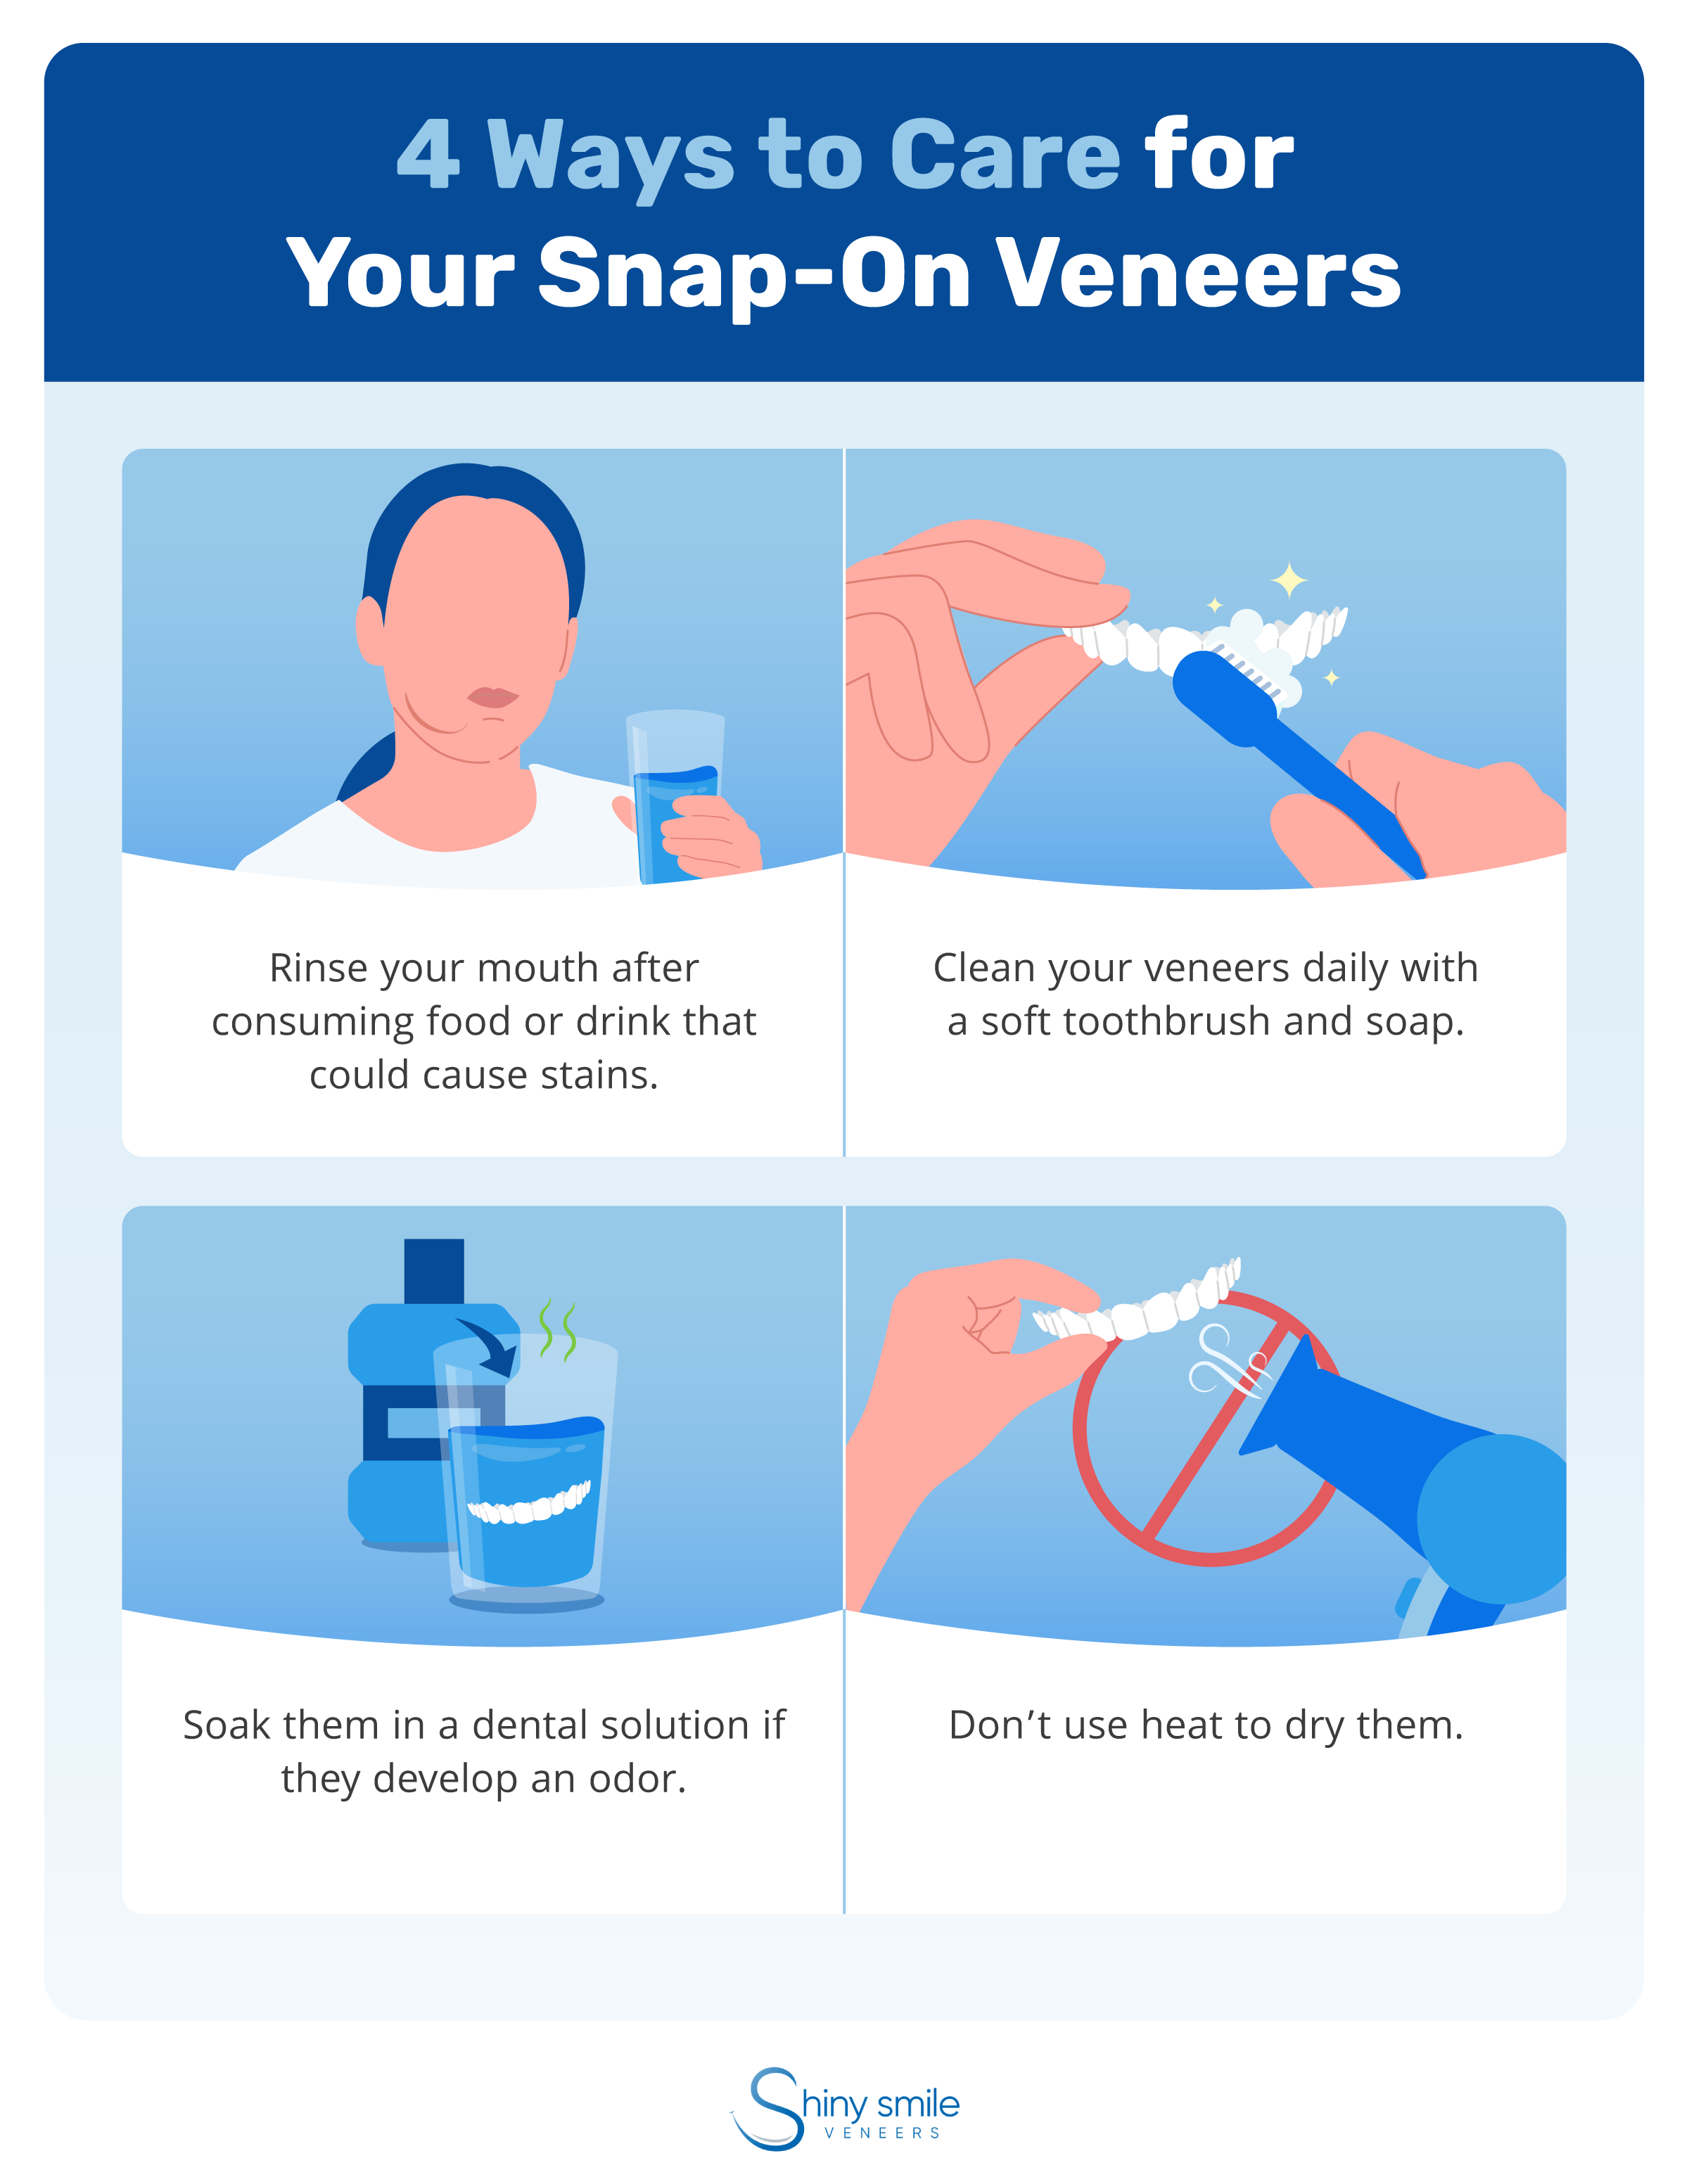 How to care for snap-on veneers